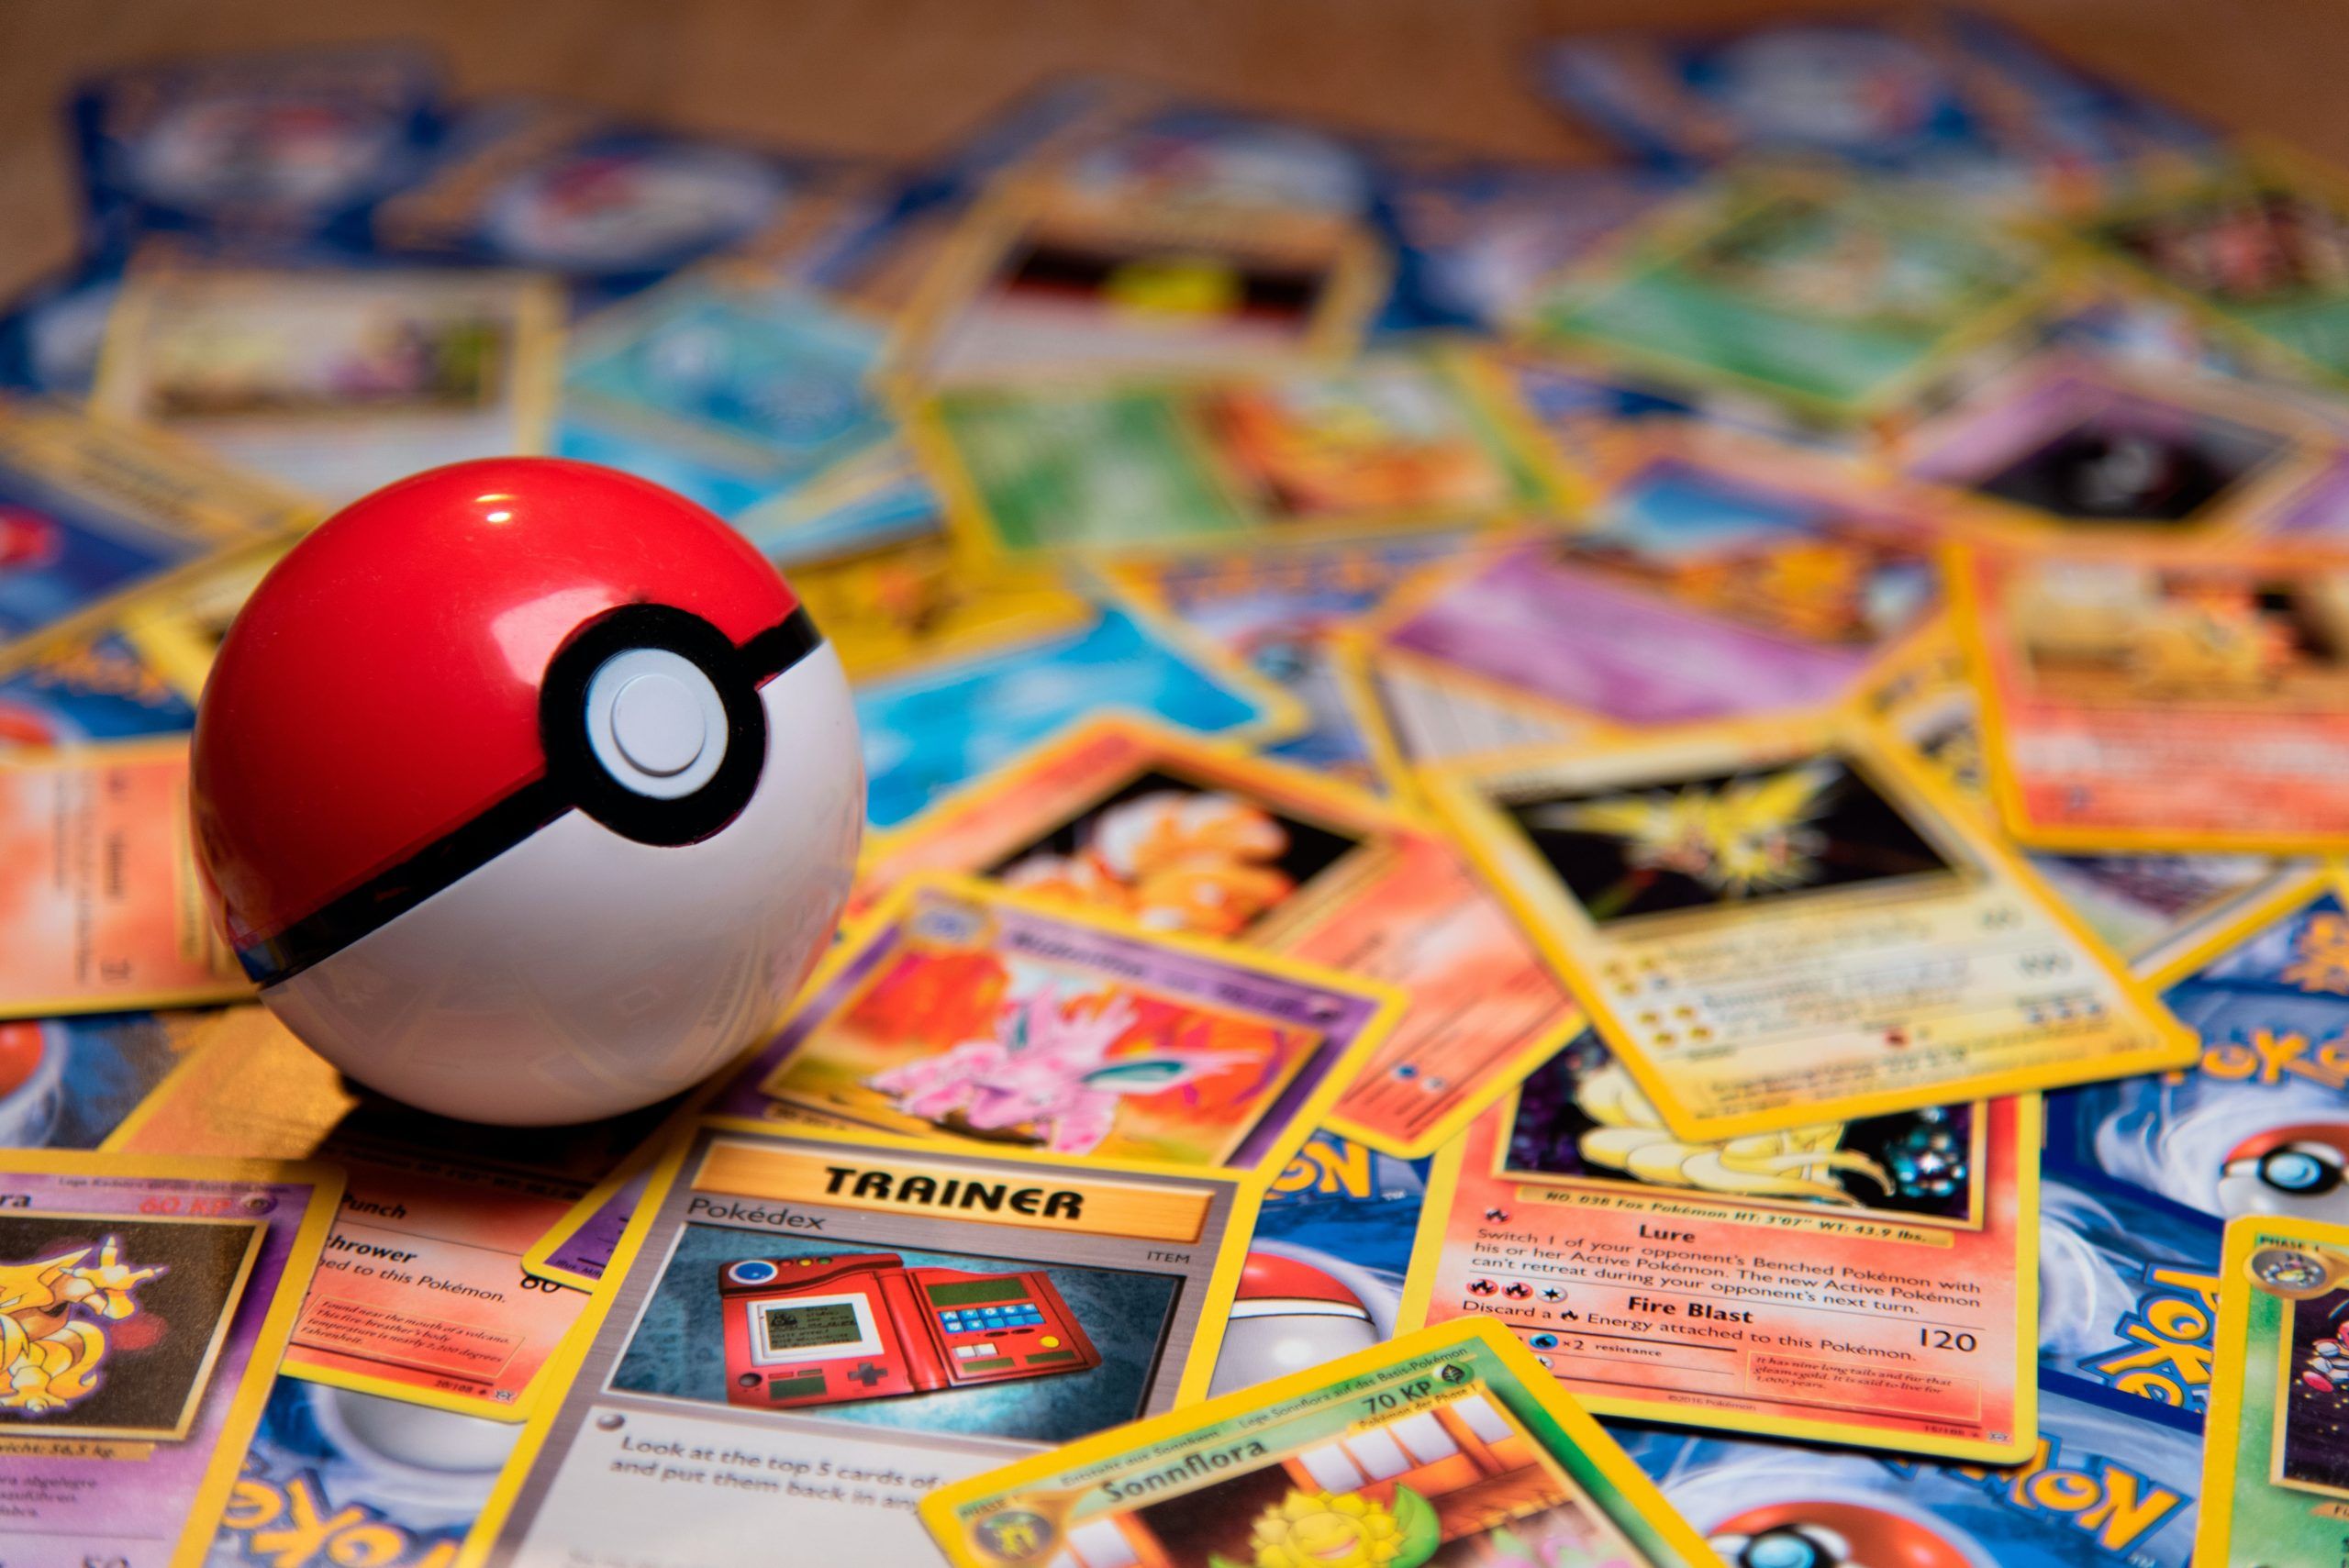 7 Most Expensive and Rare Pokemon Cards Sold at Japanese Auction